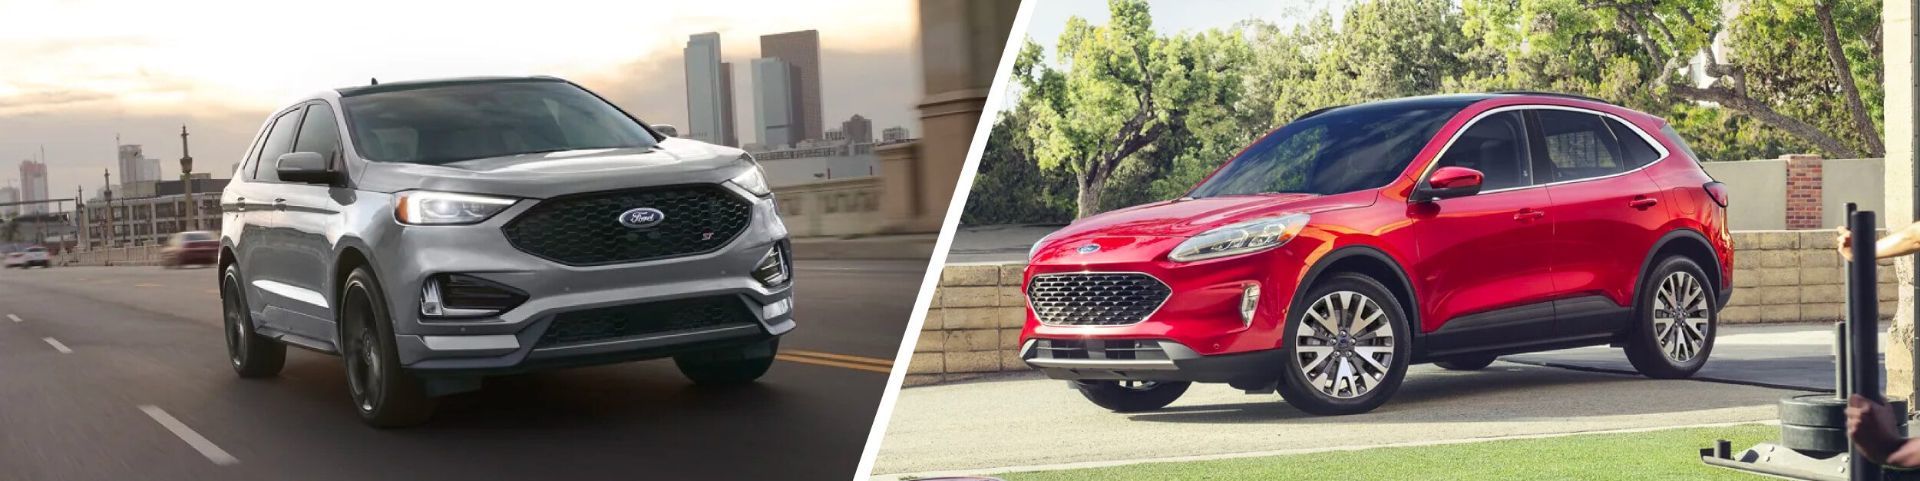 Ford Edge Vs Ford Escape: Differences You Need To Know